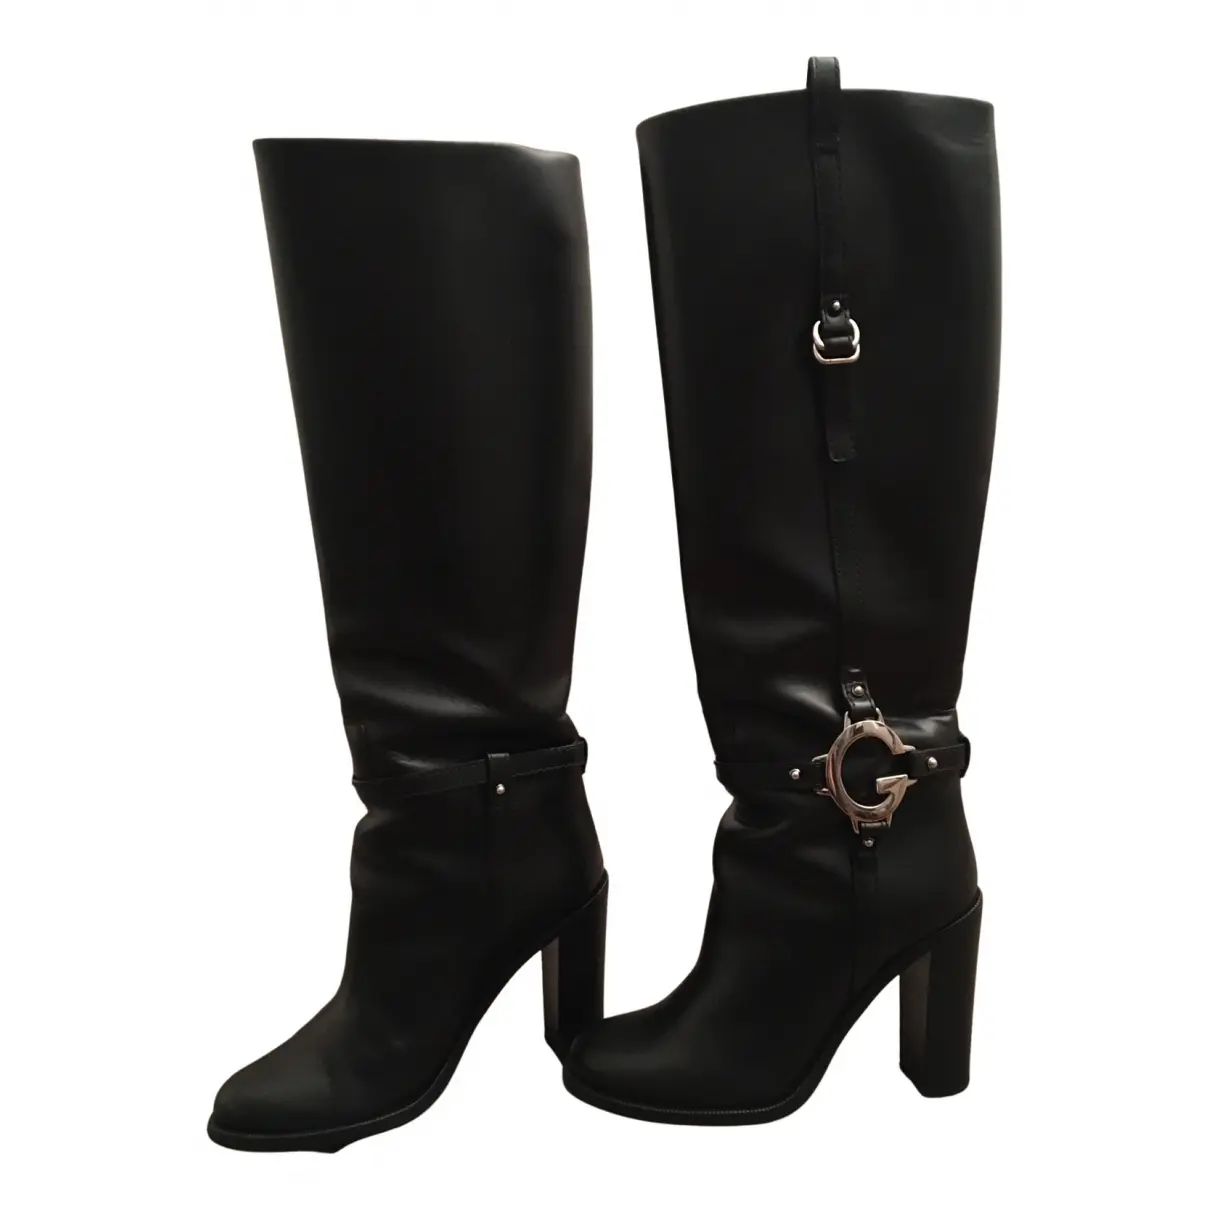 Leather riding boots Gucci